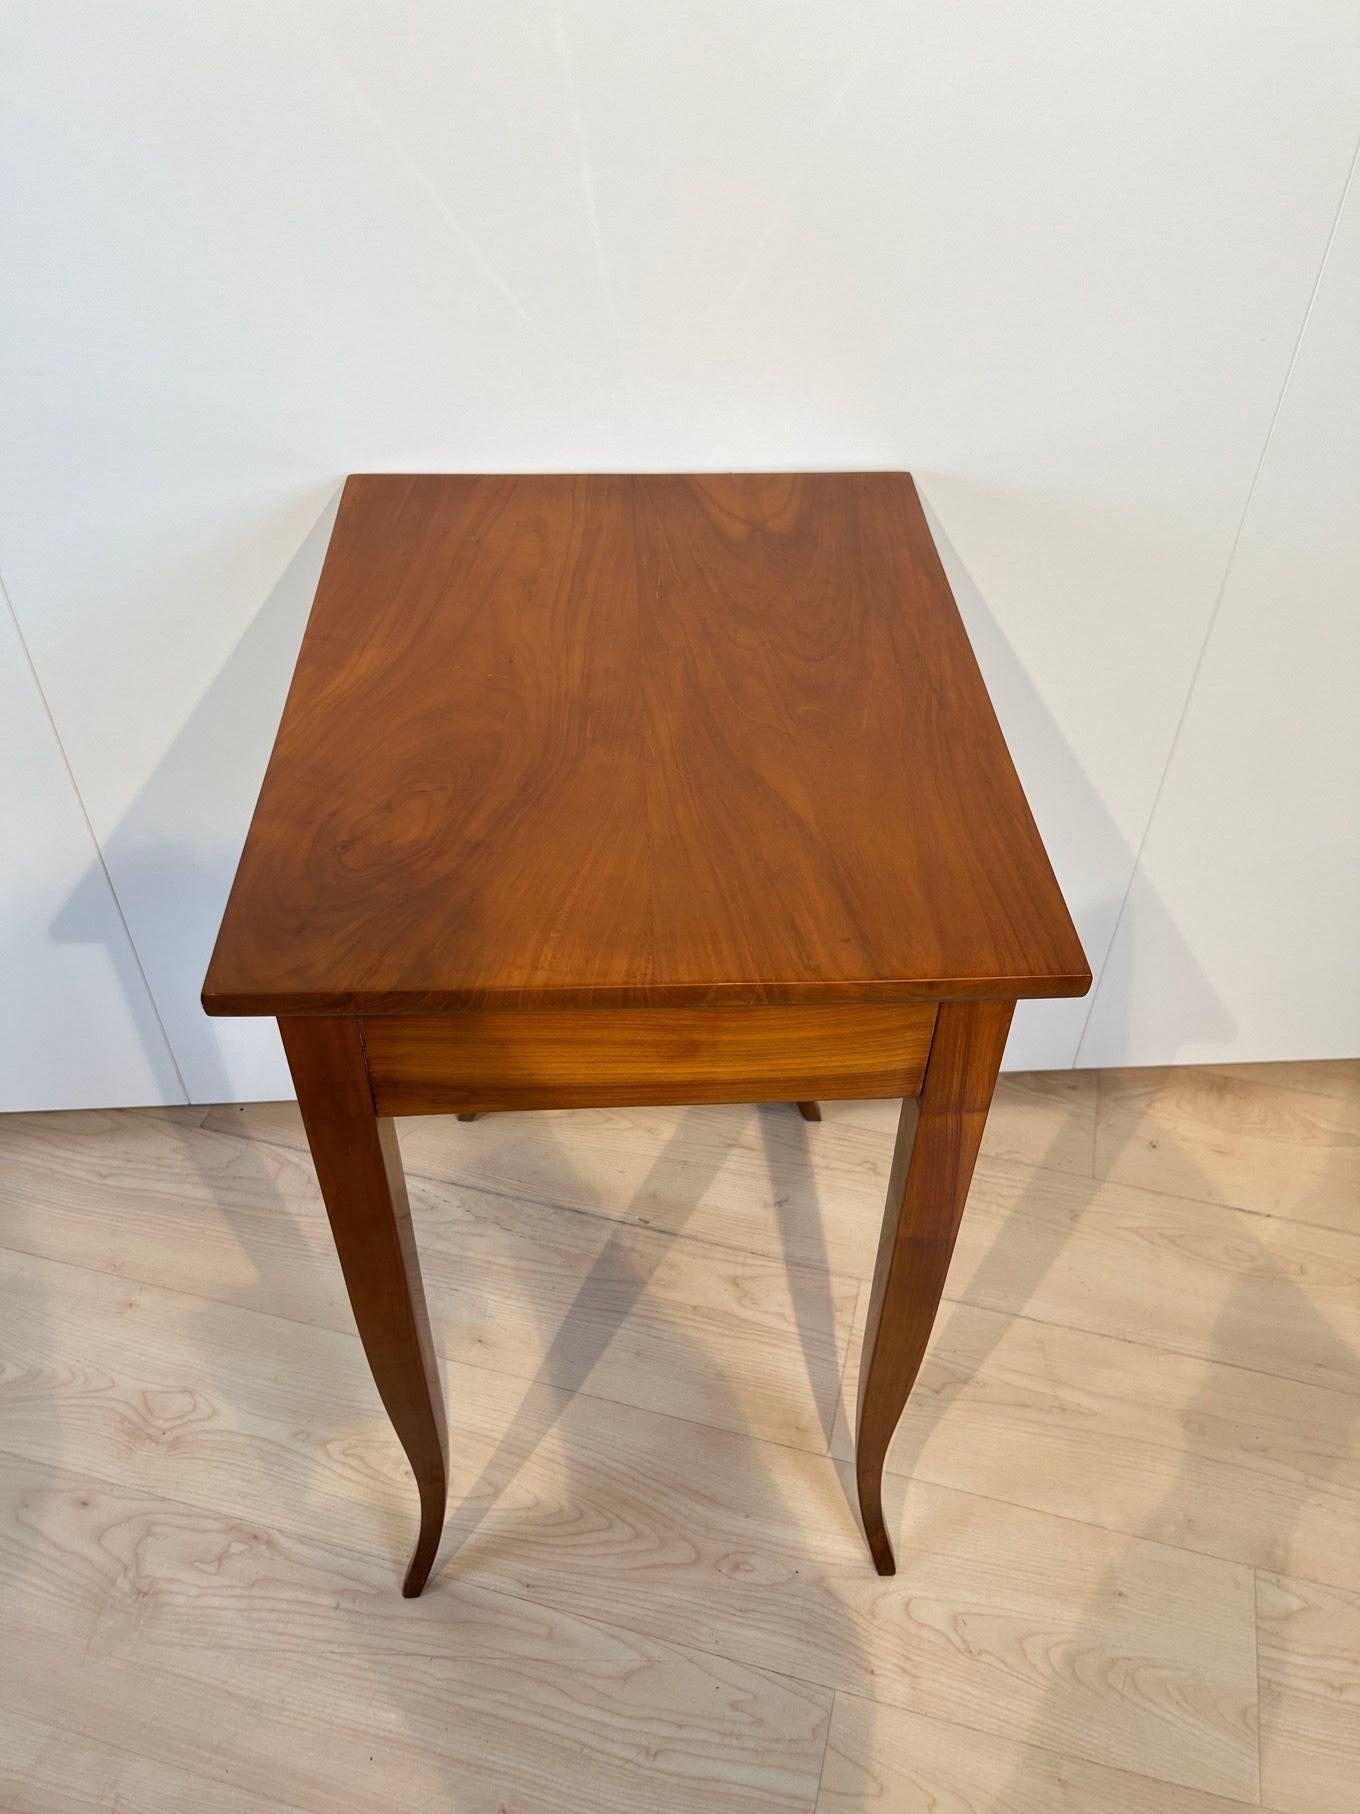 Biedermeier Side Table with Drawer, Cherry Wood, South Germany circa 1825 For Sale 12